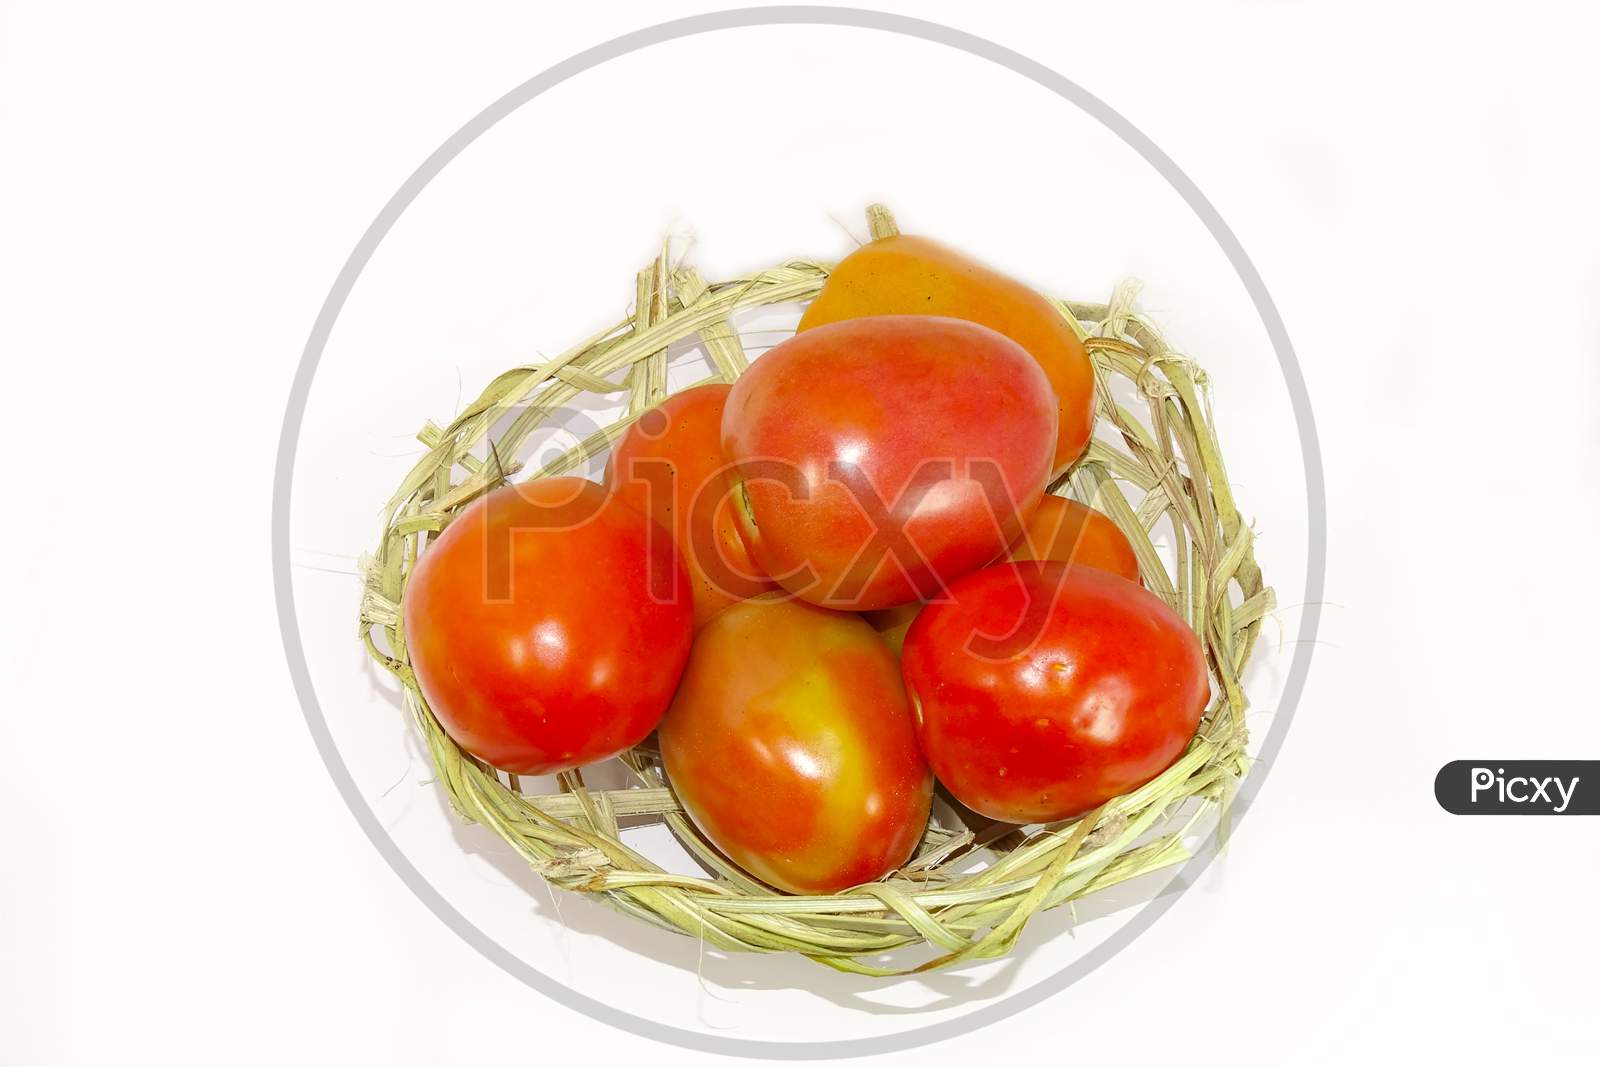 Fresh red tomatoes in basket isolated on white background.